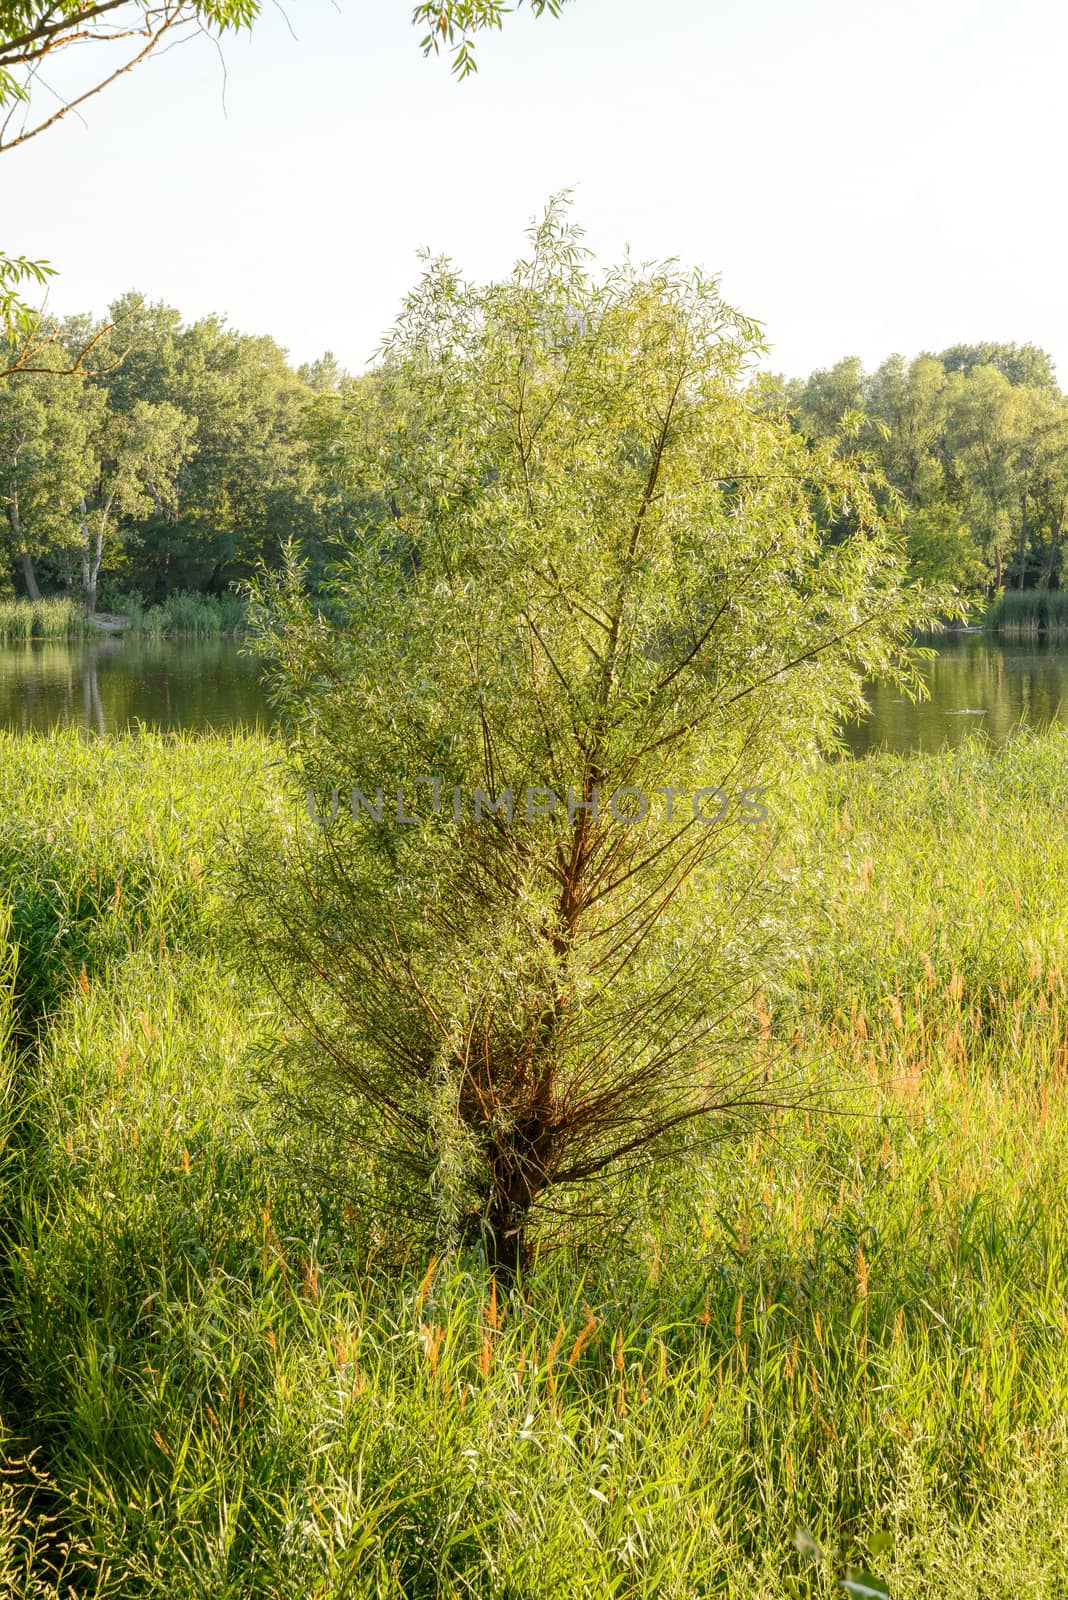 Green reeds are growing close to the lake in summer. A willow grows in the middle. The evening light plays with the wind and creates a quiet atmosphere.